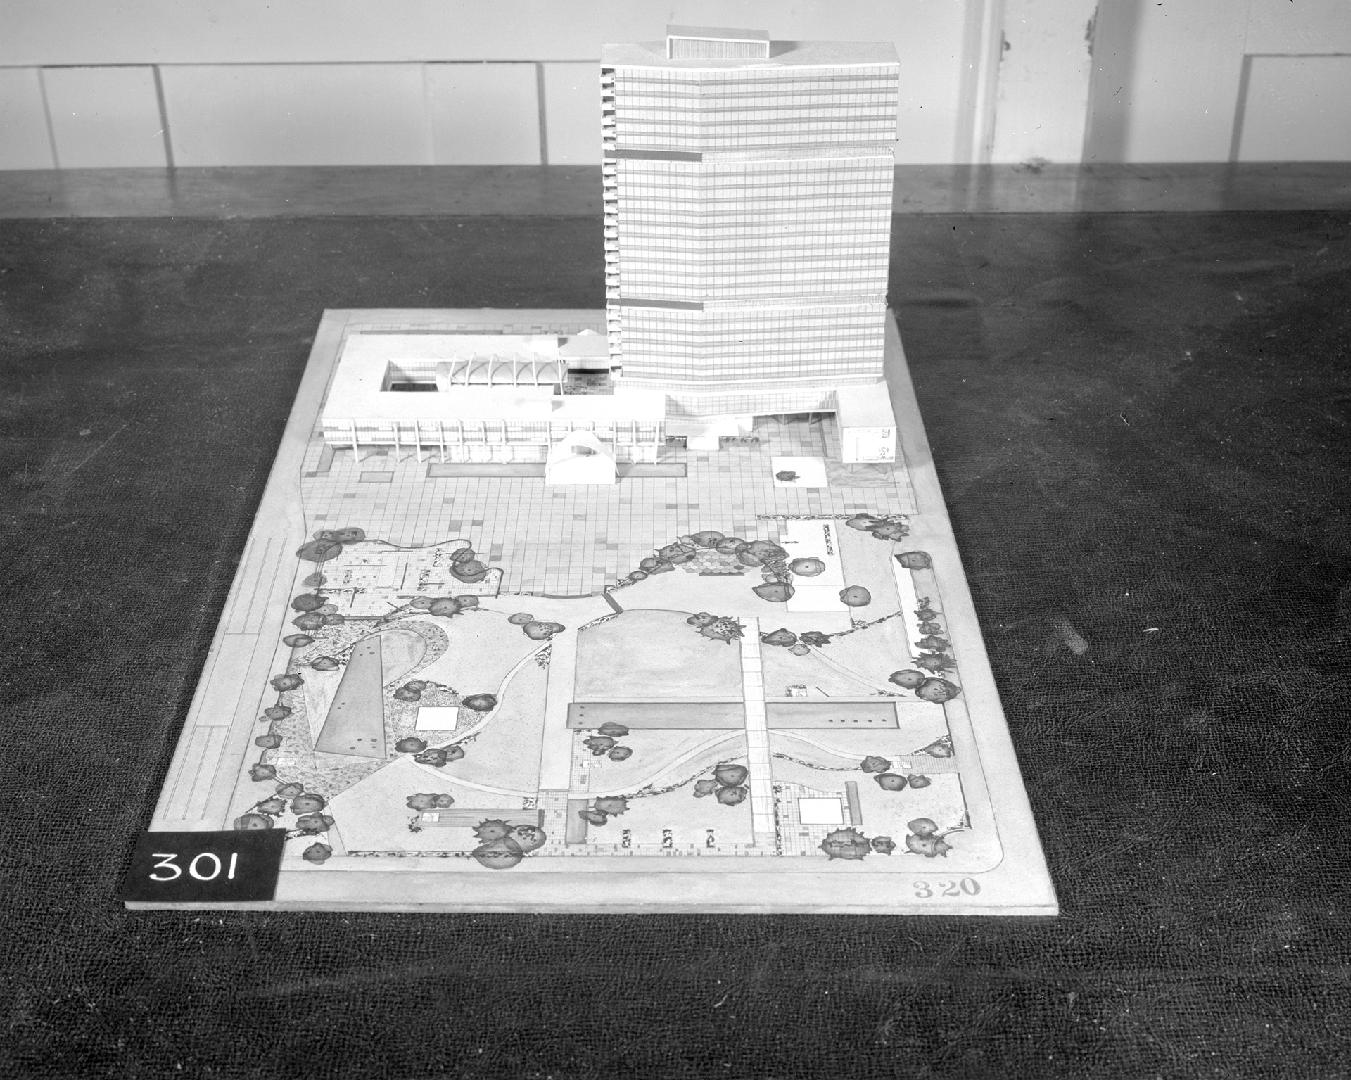 A. F. Bennett entry, City Hall and Square Competition, Toronto, 1958, architectural model